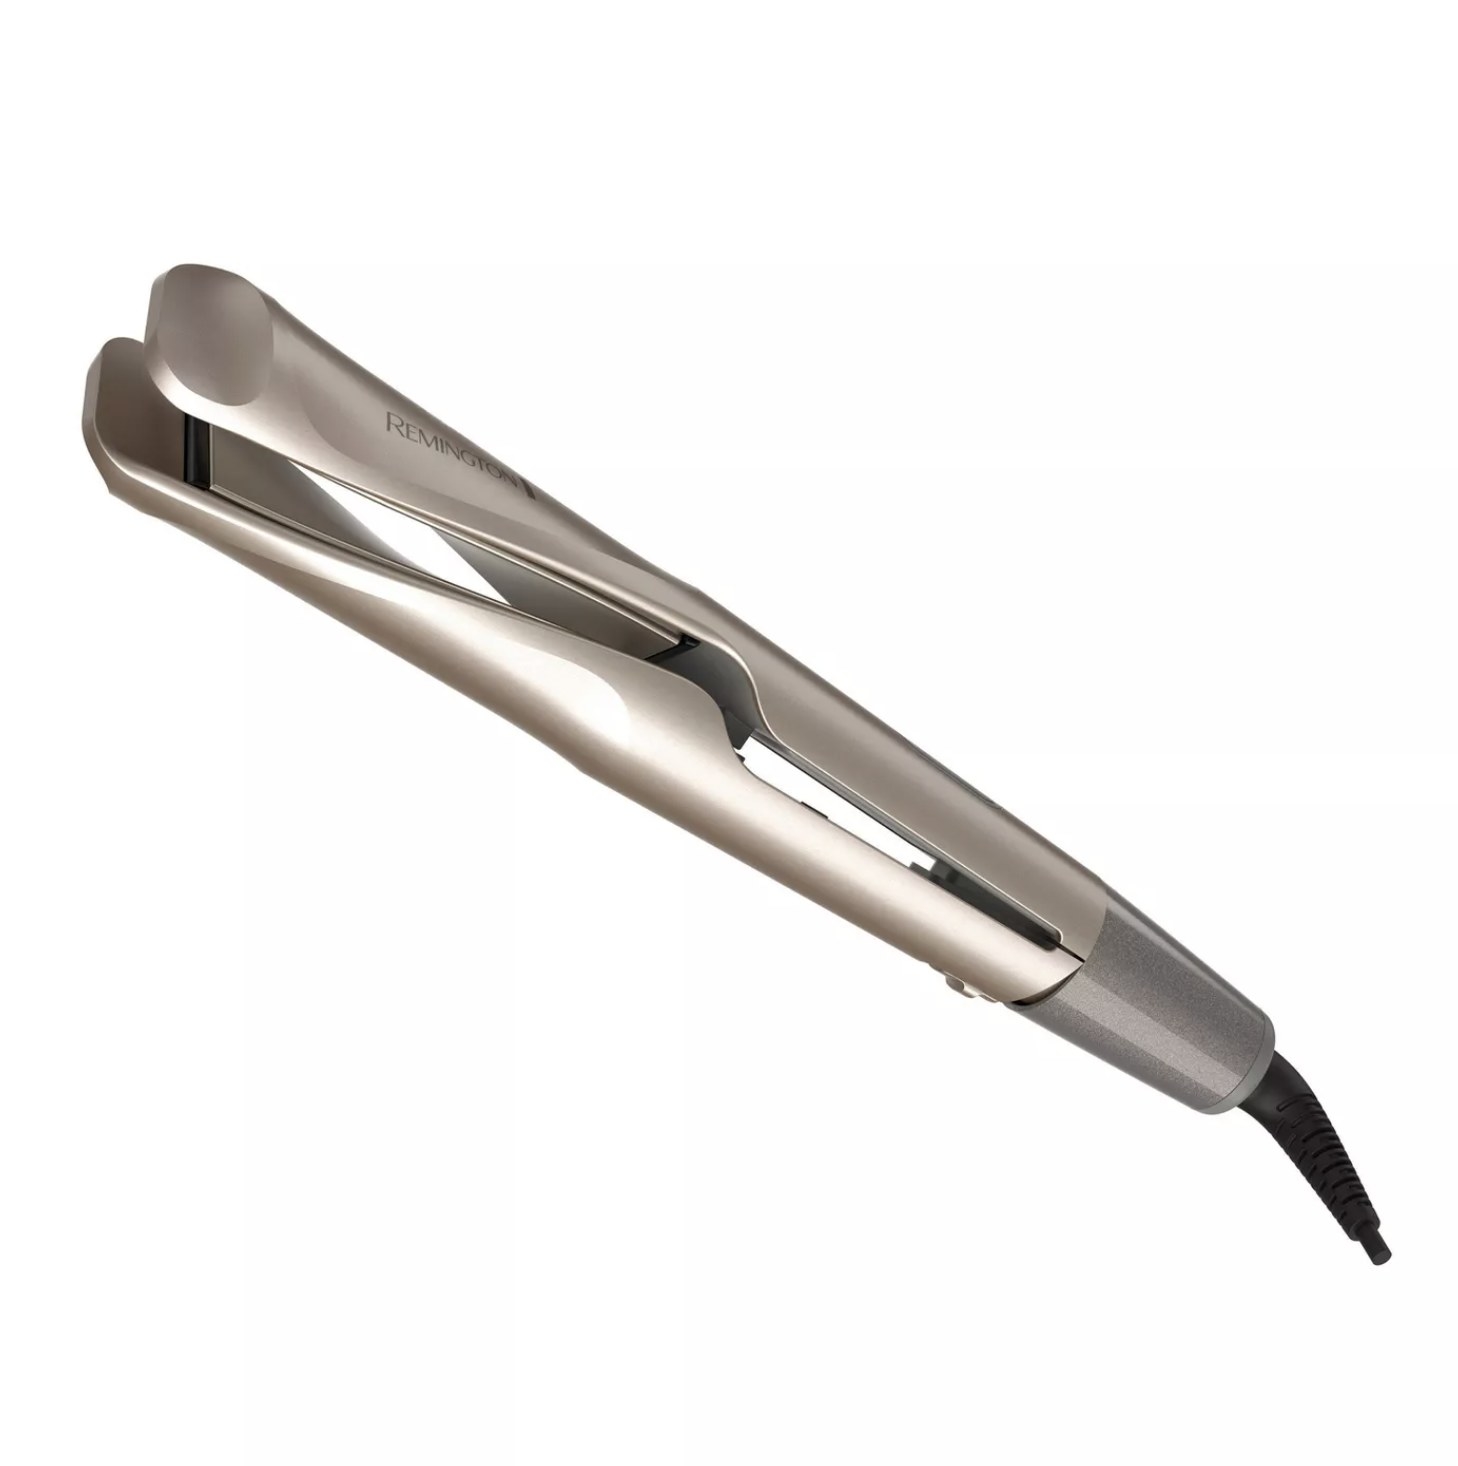 A silver ceramic curler and straightener in one